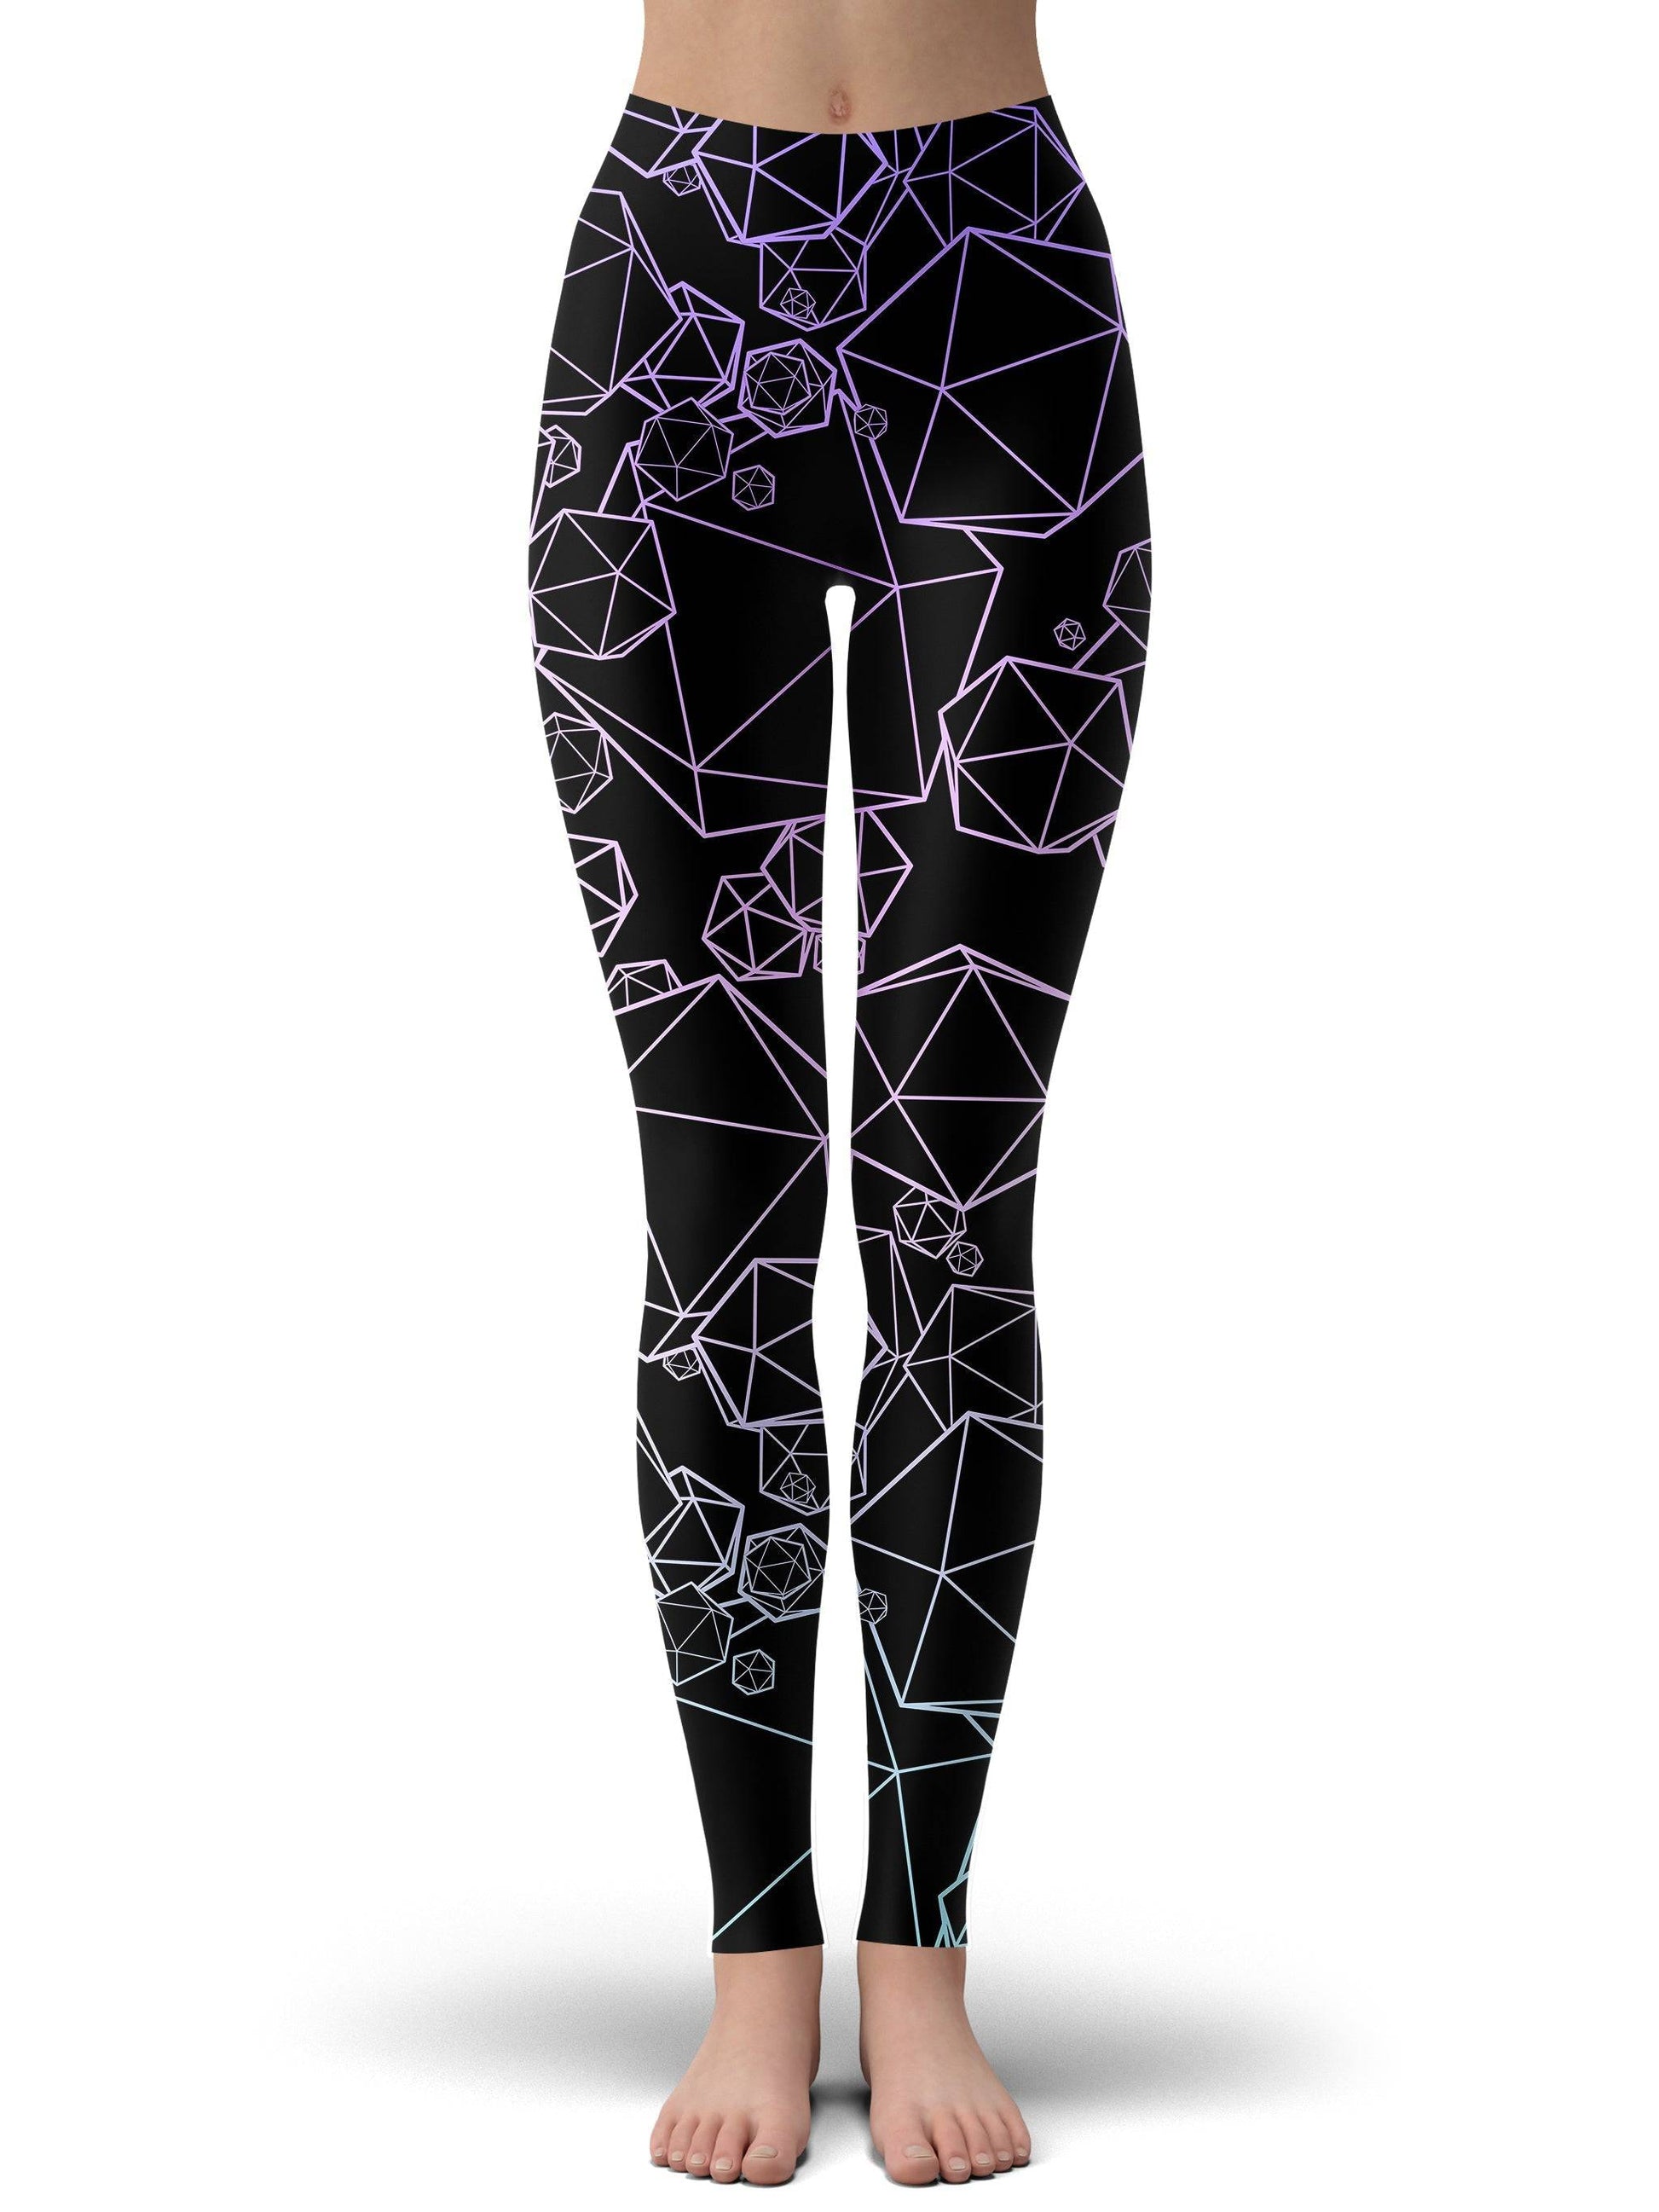 Icosahedron Madness Cold Hoodie Dress and Leggings Combo, Yantrart Design, | iEDM